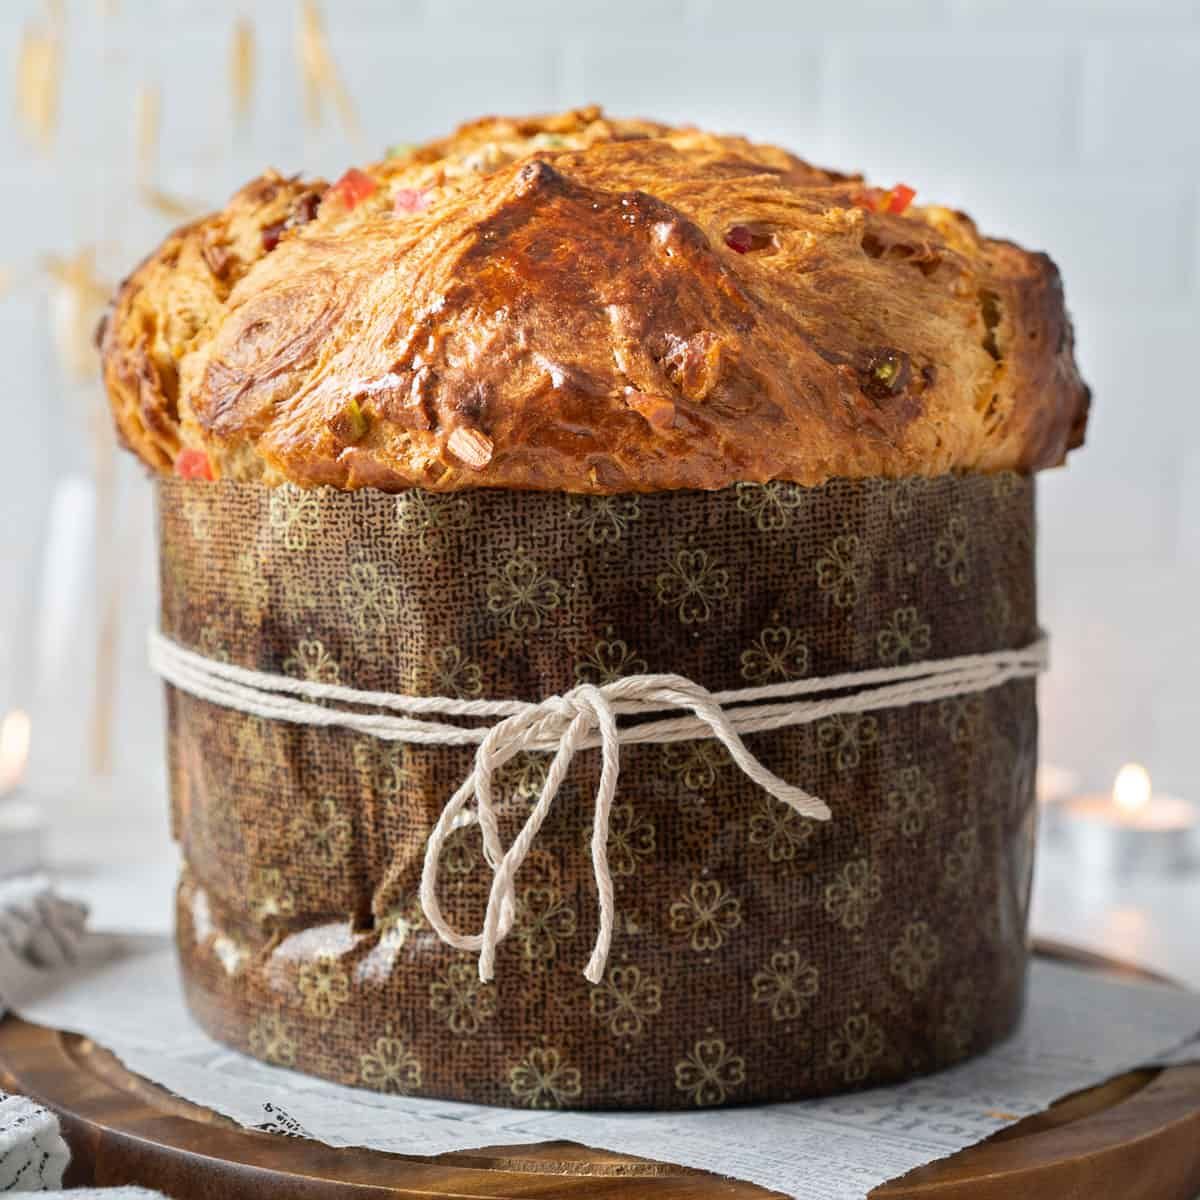 How To Store Panettone